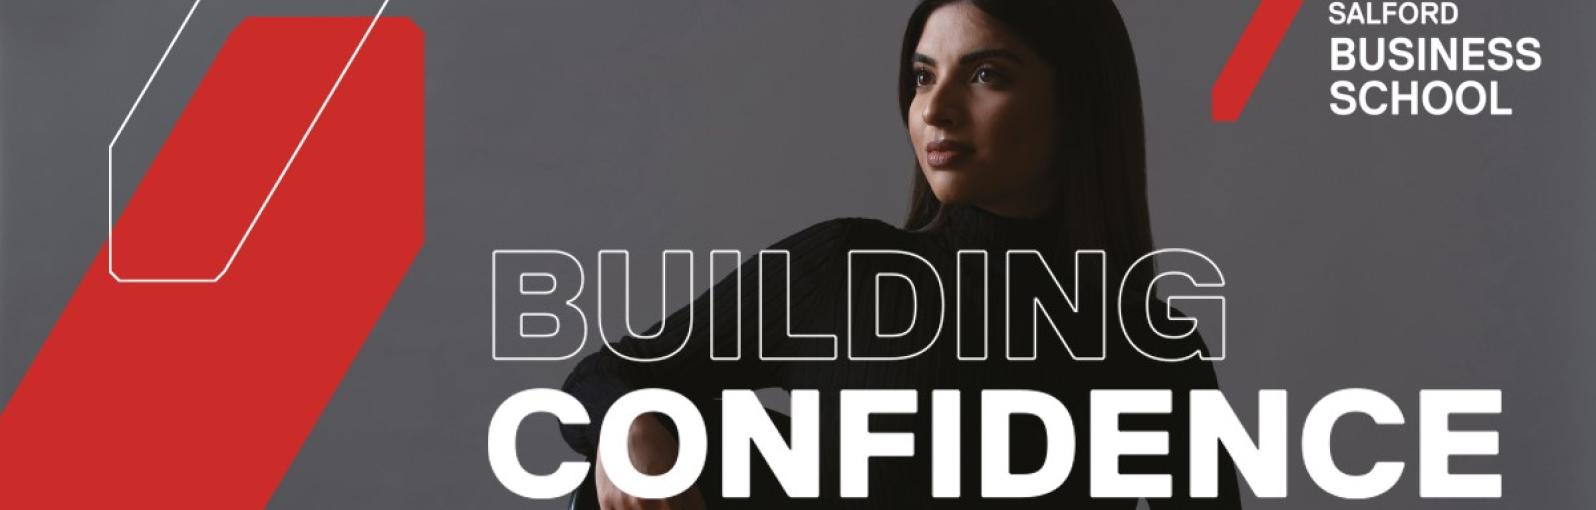 Building confidence banner image